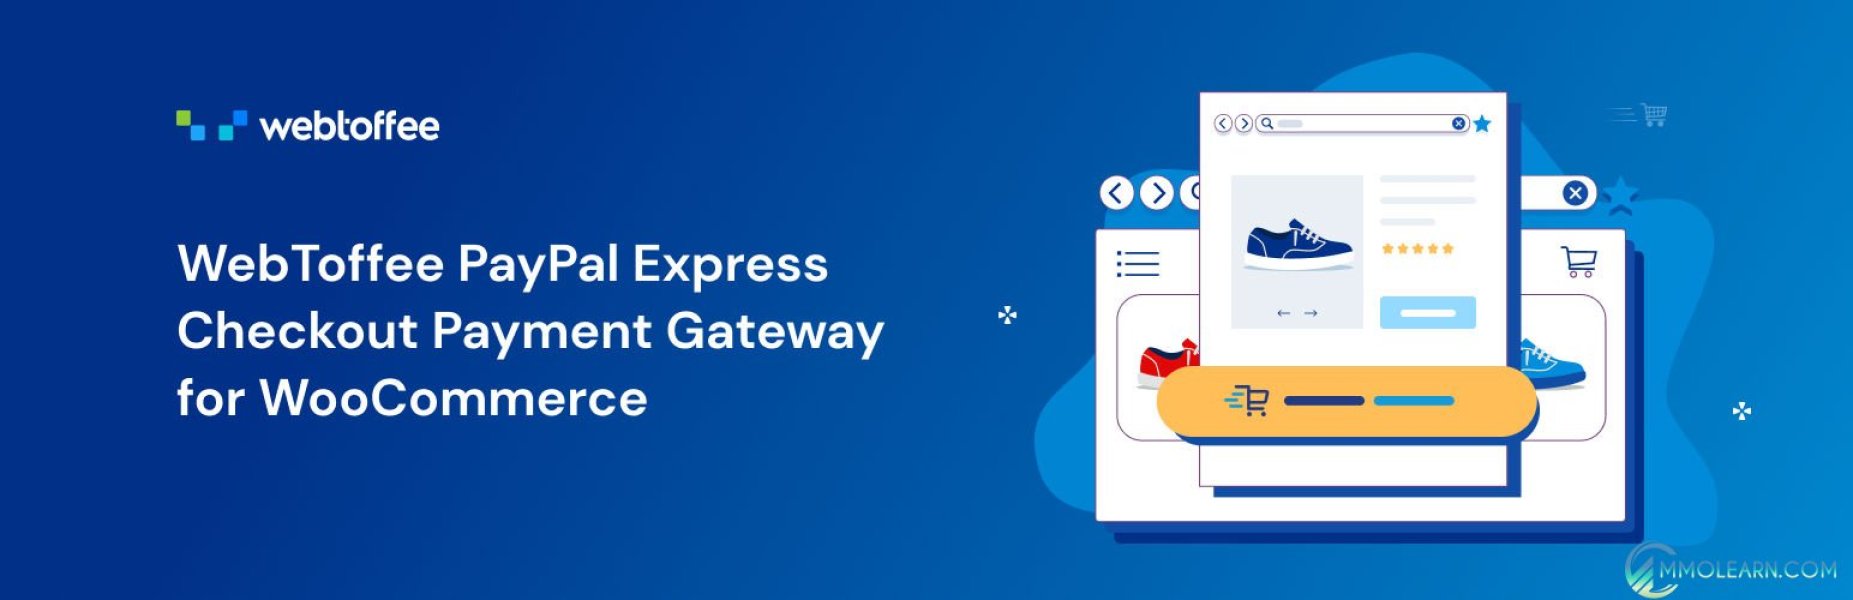 PayPal Express Checkout Plugin for WooCommerce